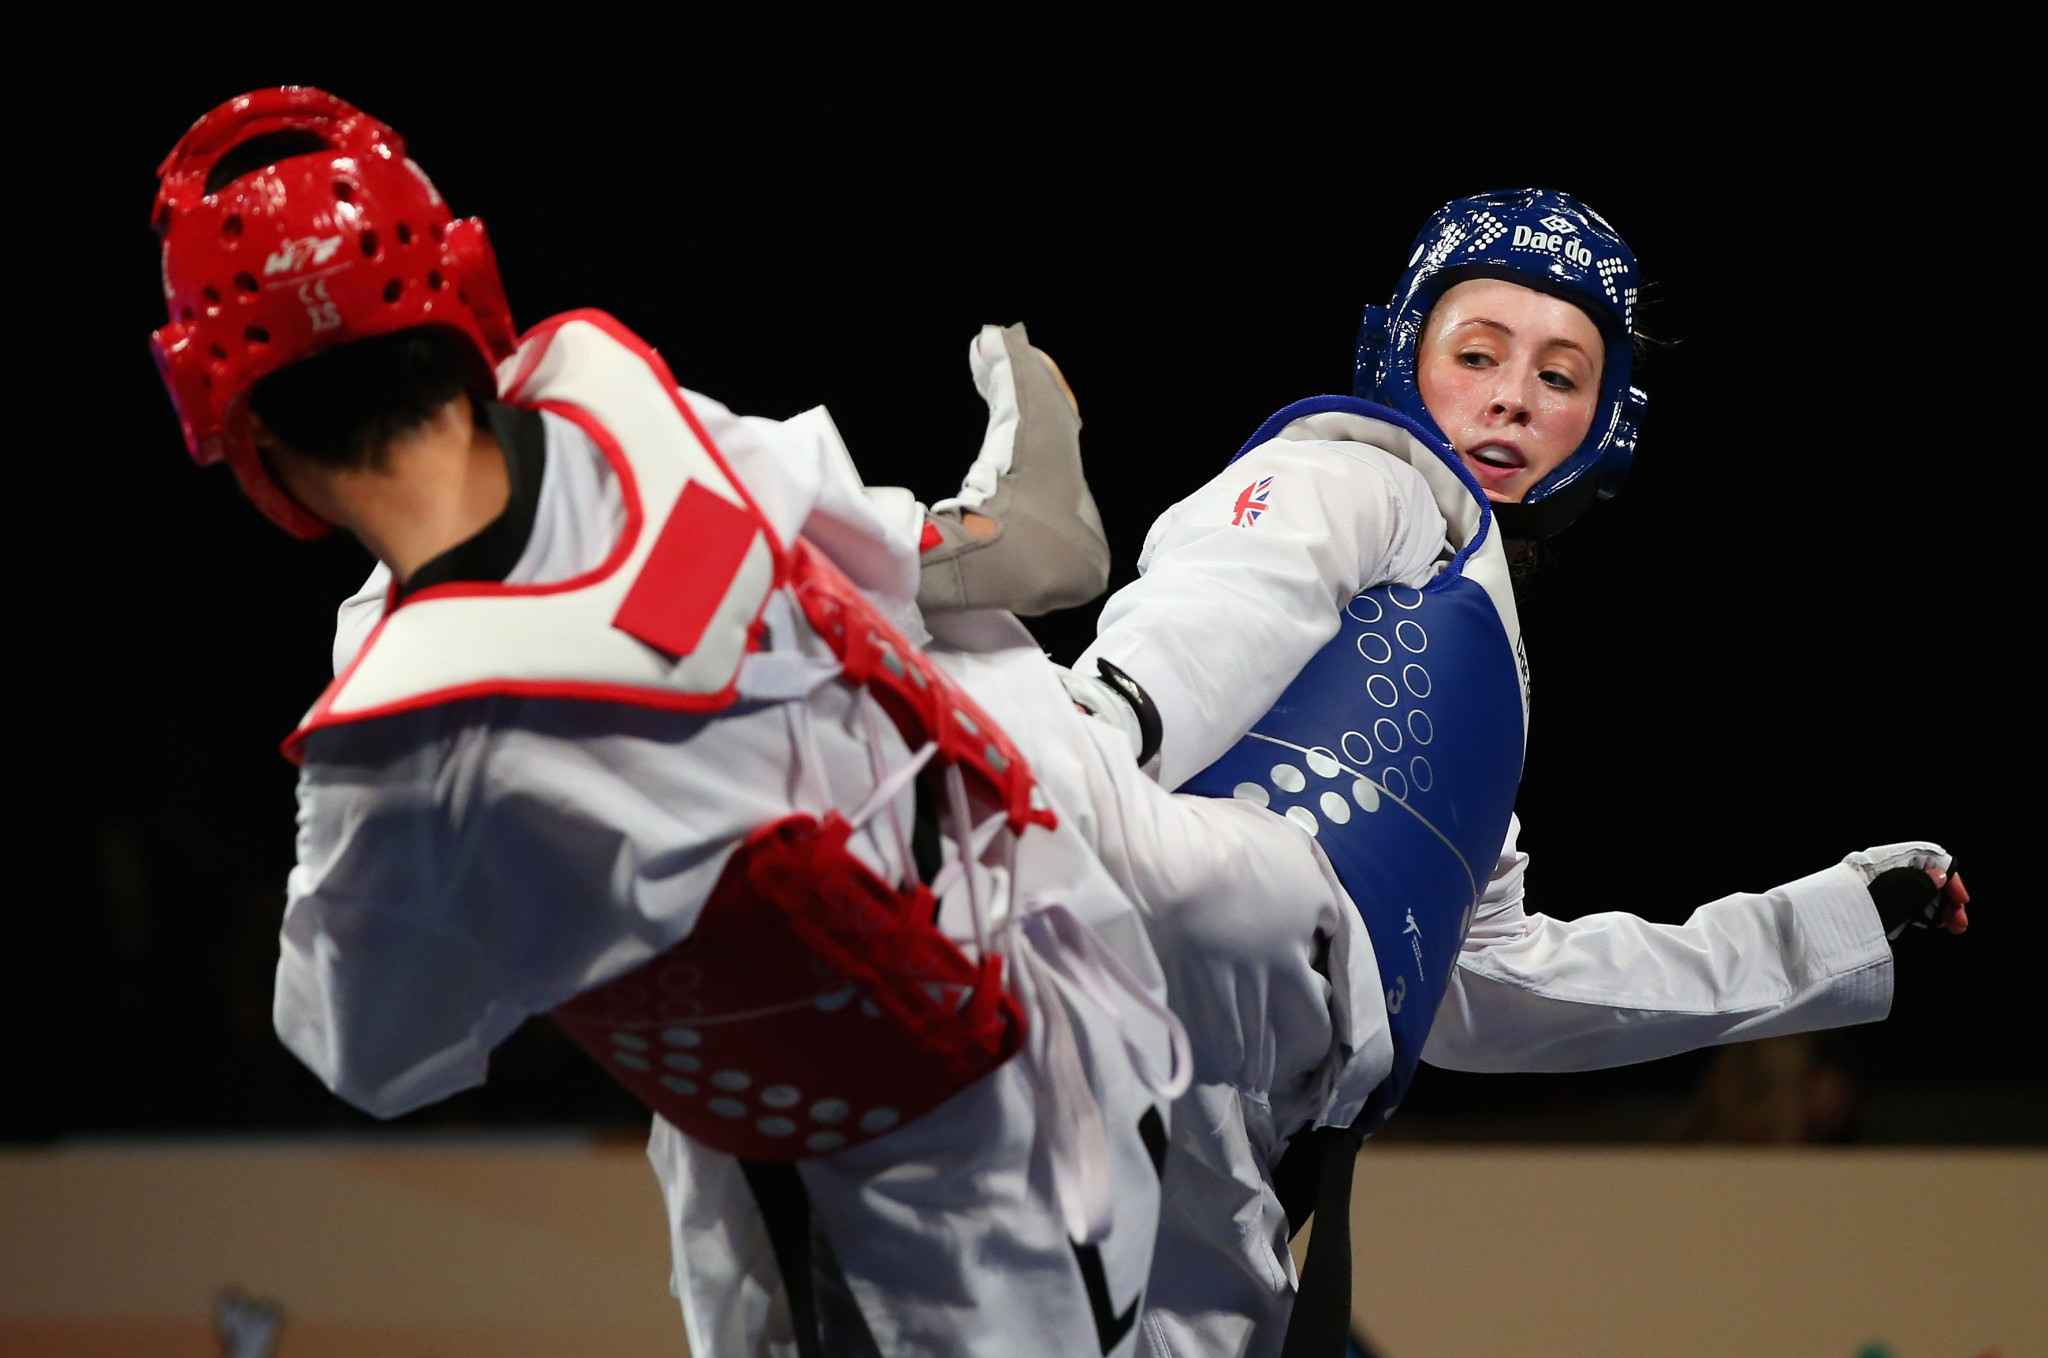 Milan will host the European taekwondo qualifier for Tokyo 2020 ©Getty Images